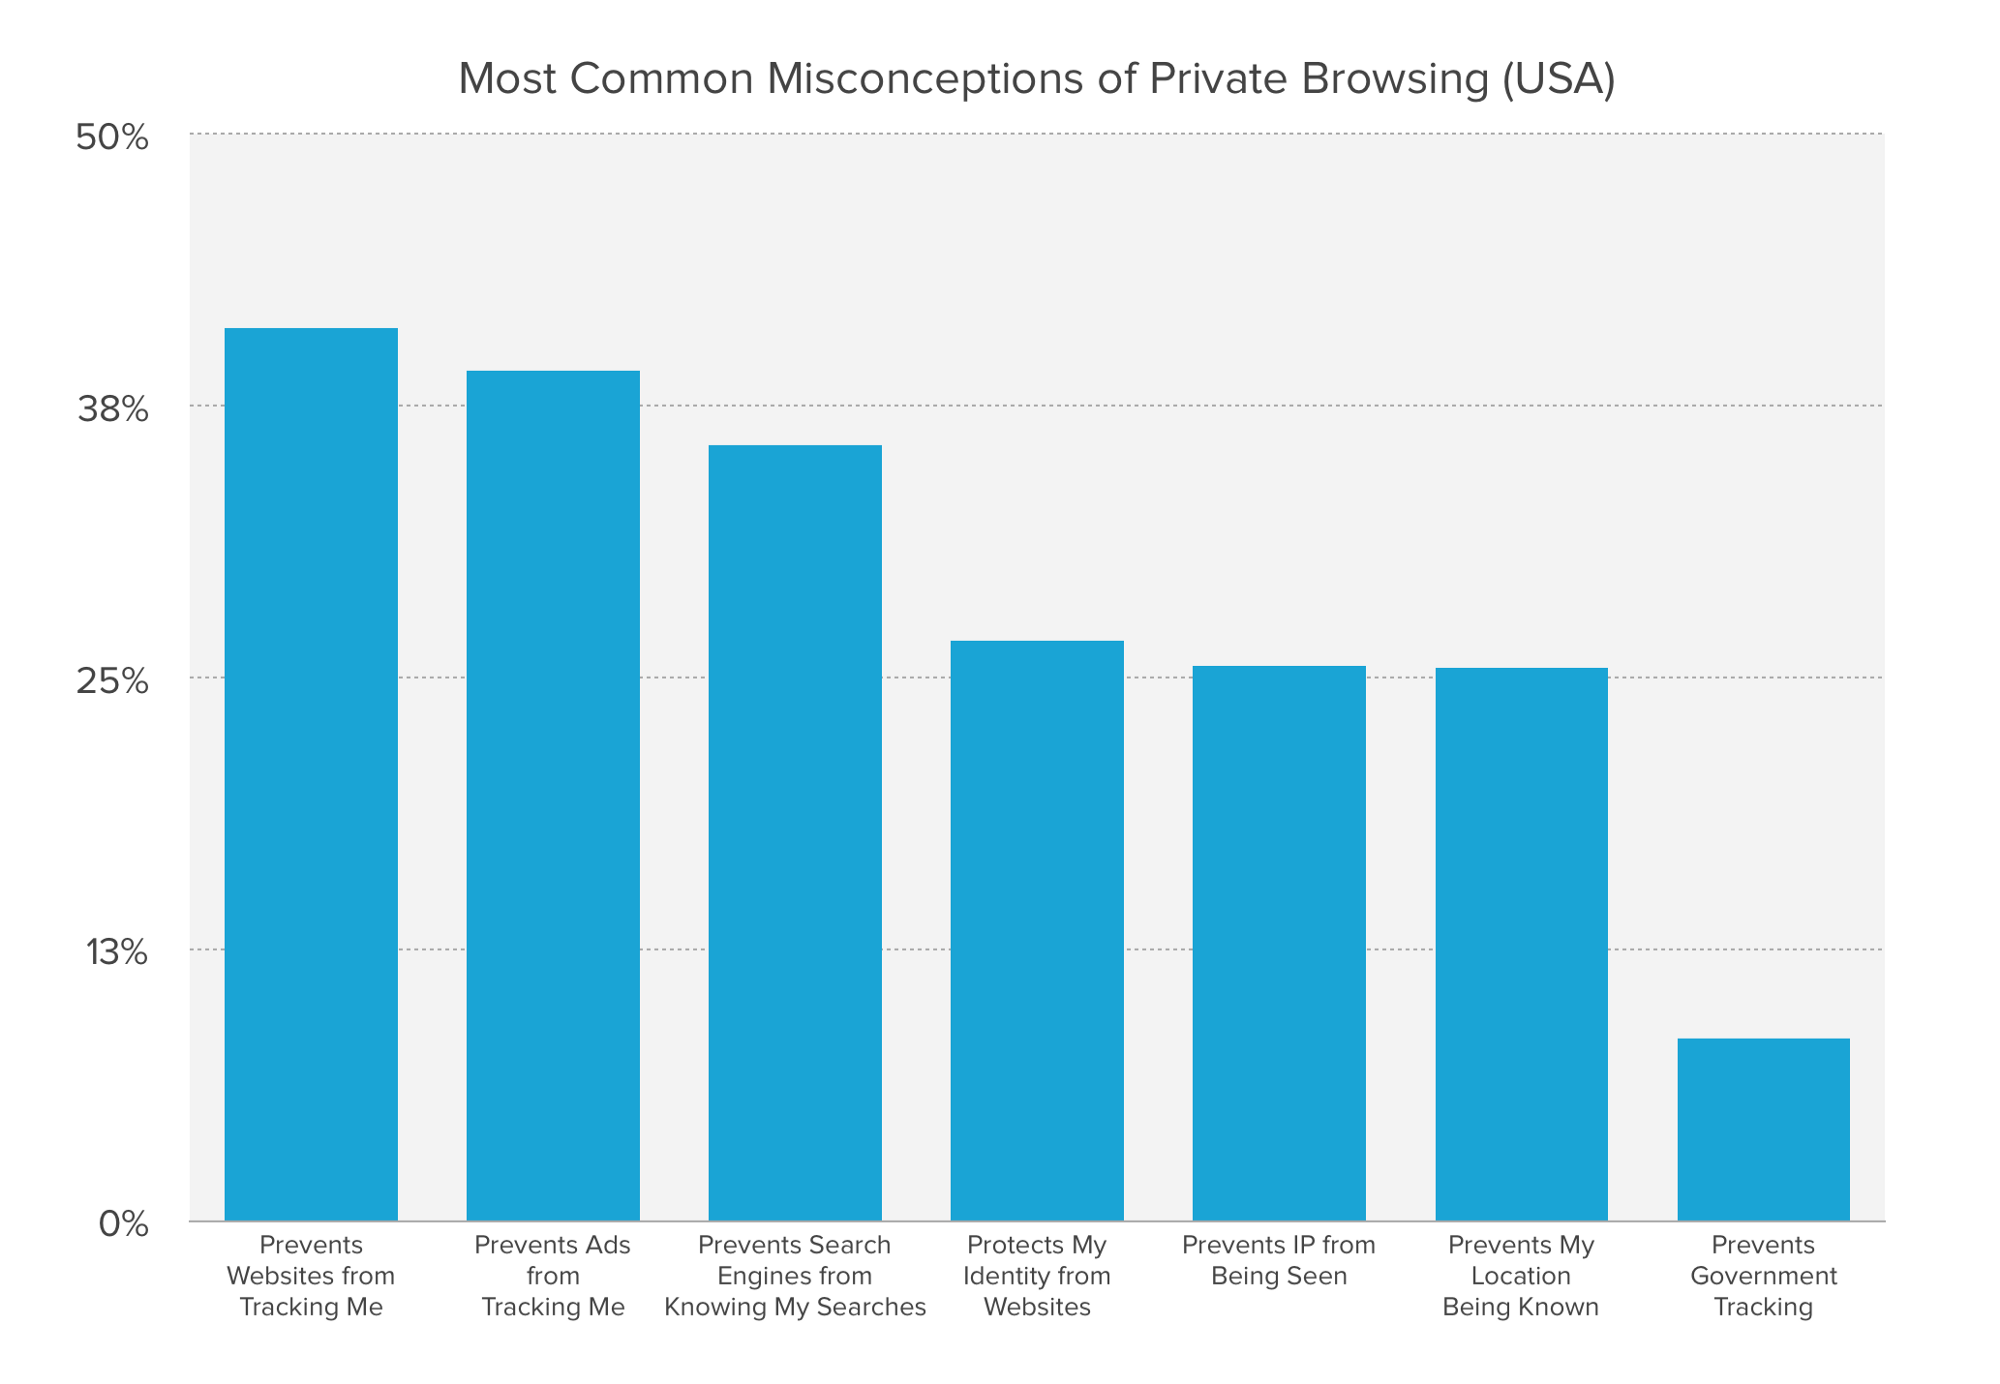 Chart showing most common misconceptions of private browsing.